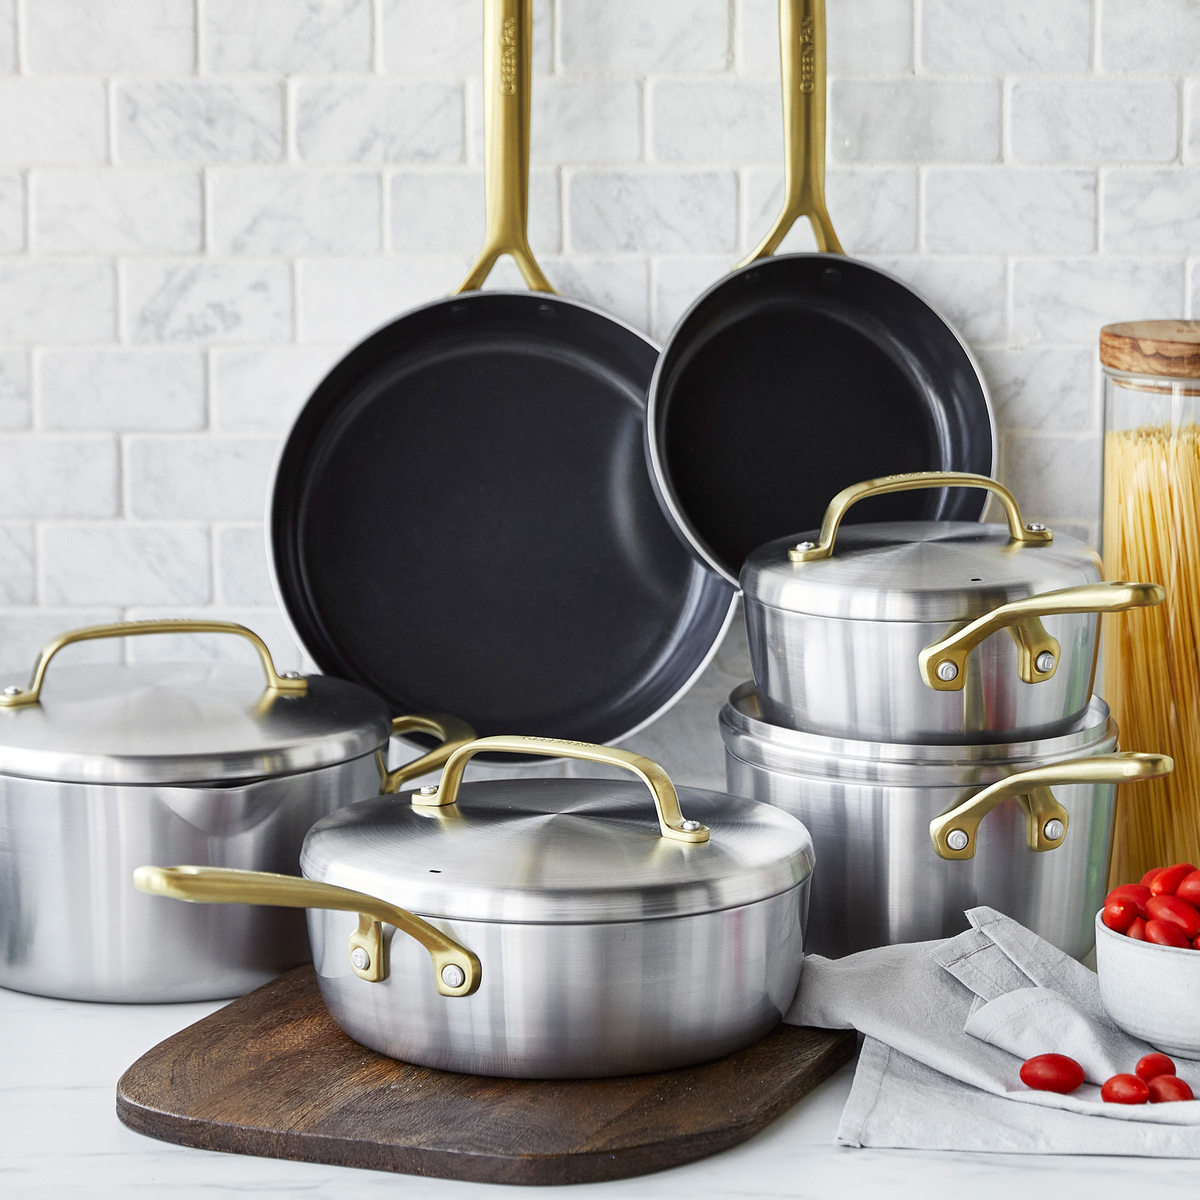 Stainless Steel: 30% Off